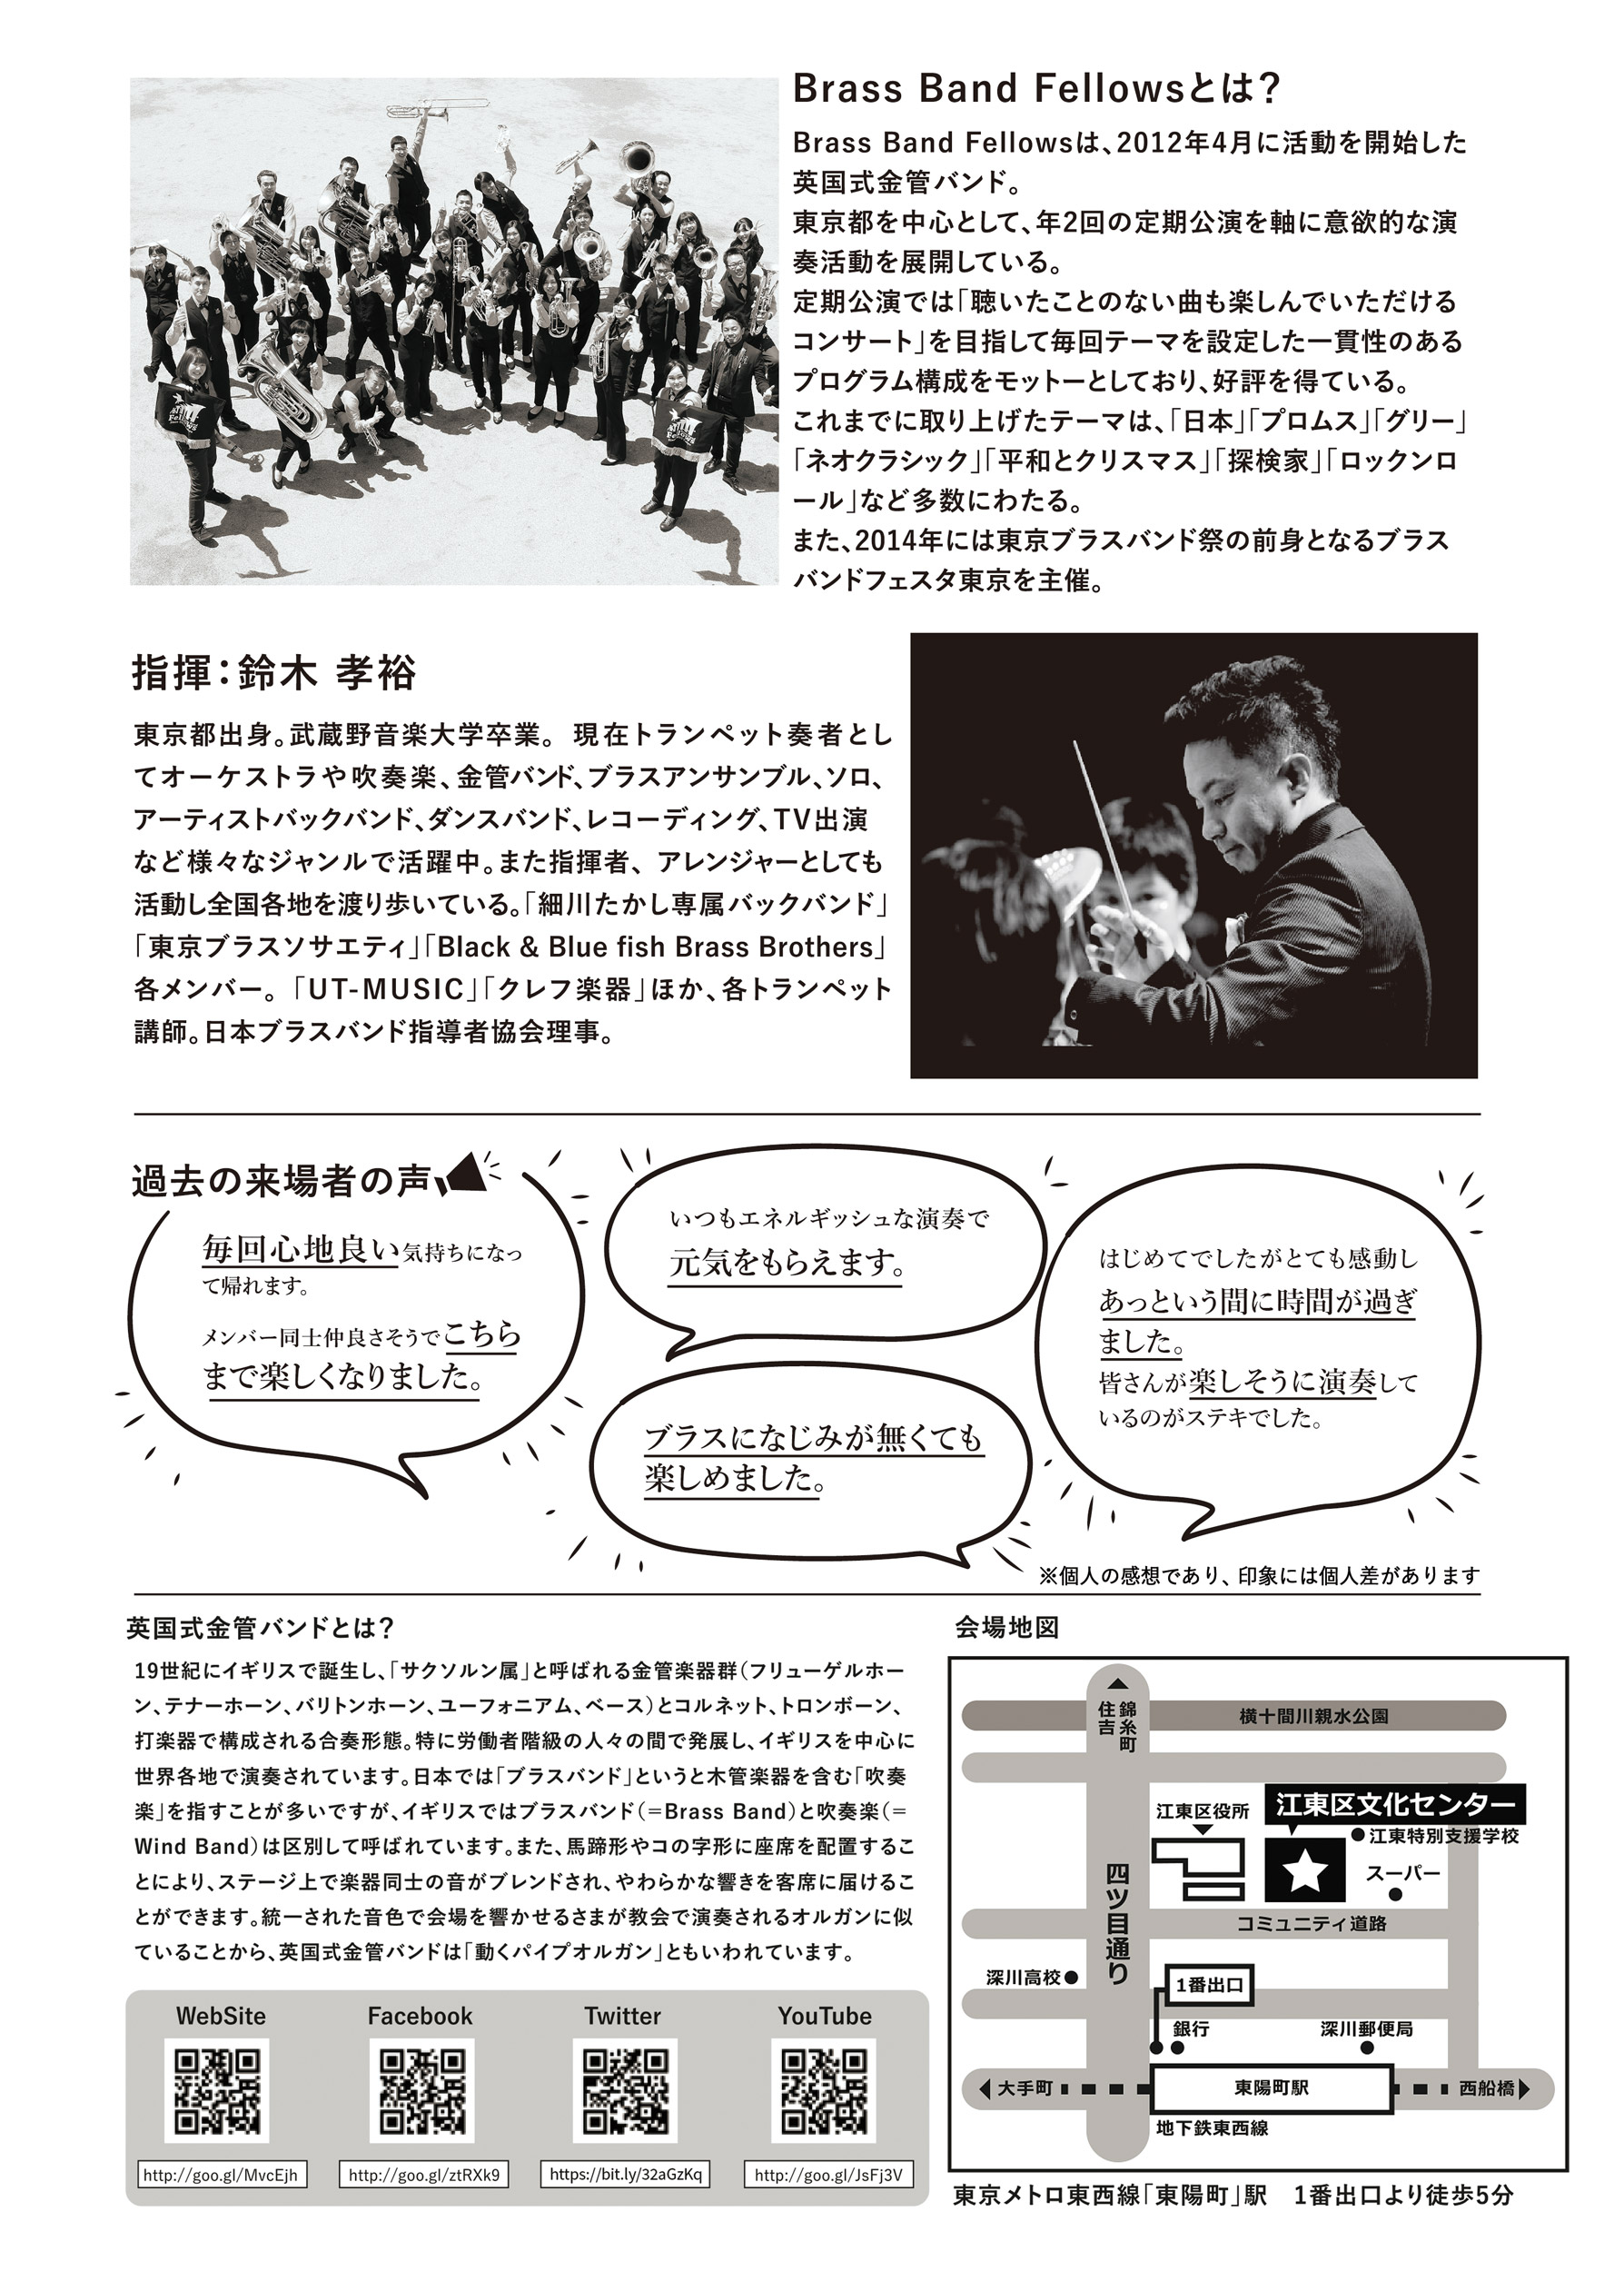 Brass Band Fellows / Fellows in Concert Vol.21 『哲学者たちの調べ』